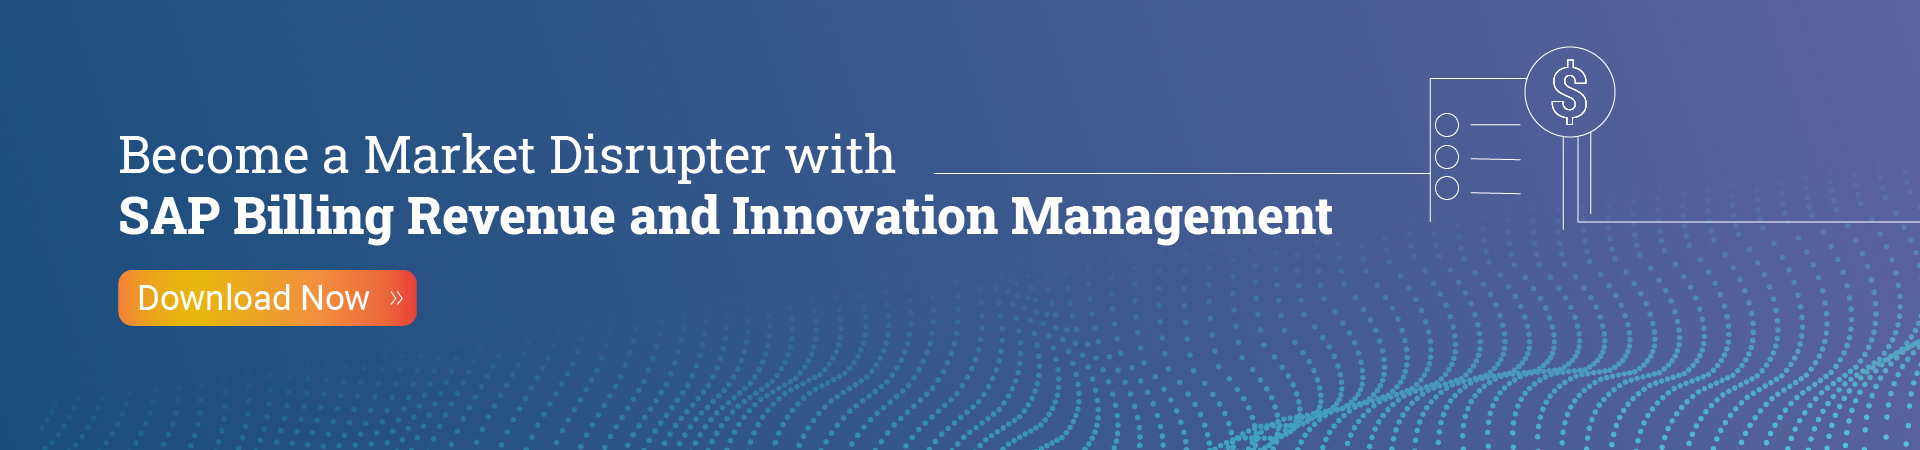 Become a Market Disrupter with SAP Billing Revenue and Innovation Management Banner